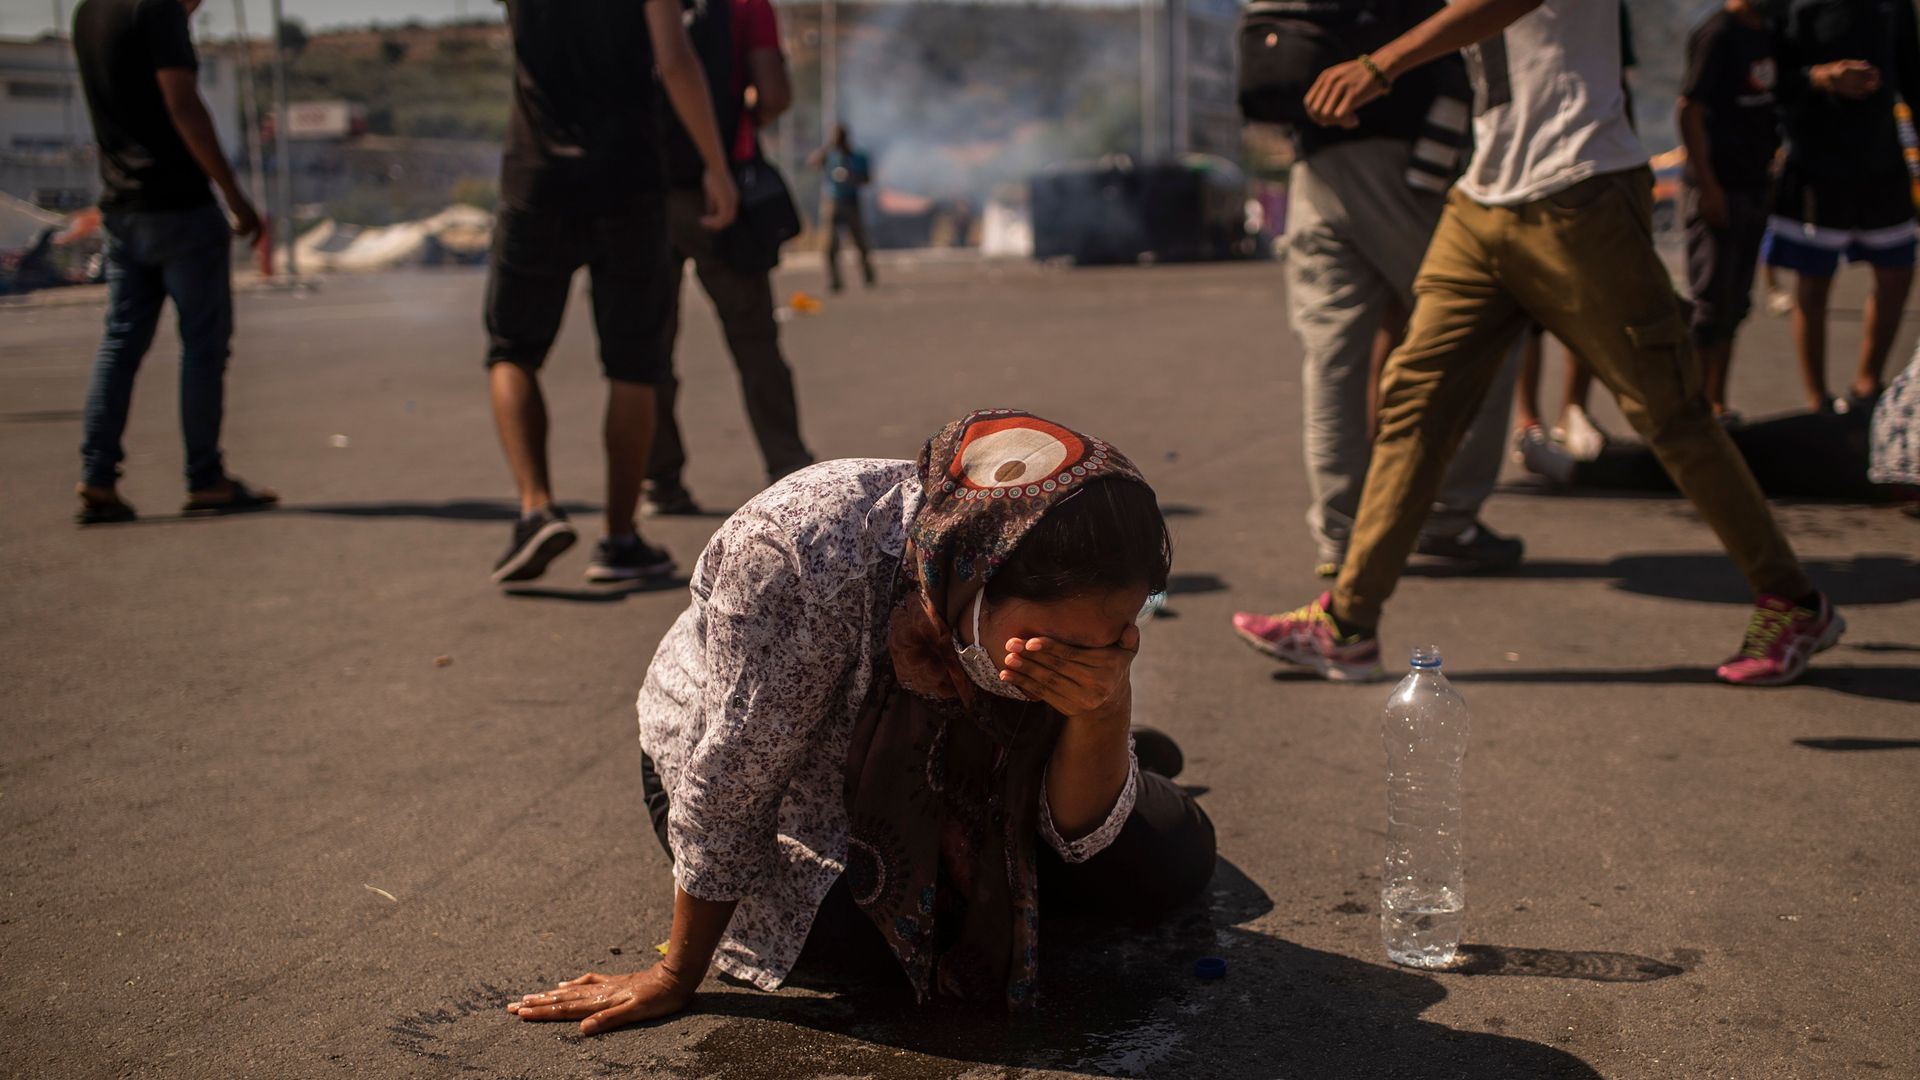 A woman cleans her eyes with water after police threw tear gas during clashes near the city Mytilene on the Greek island of Lesbos, on September 12